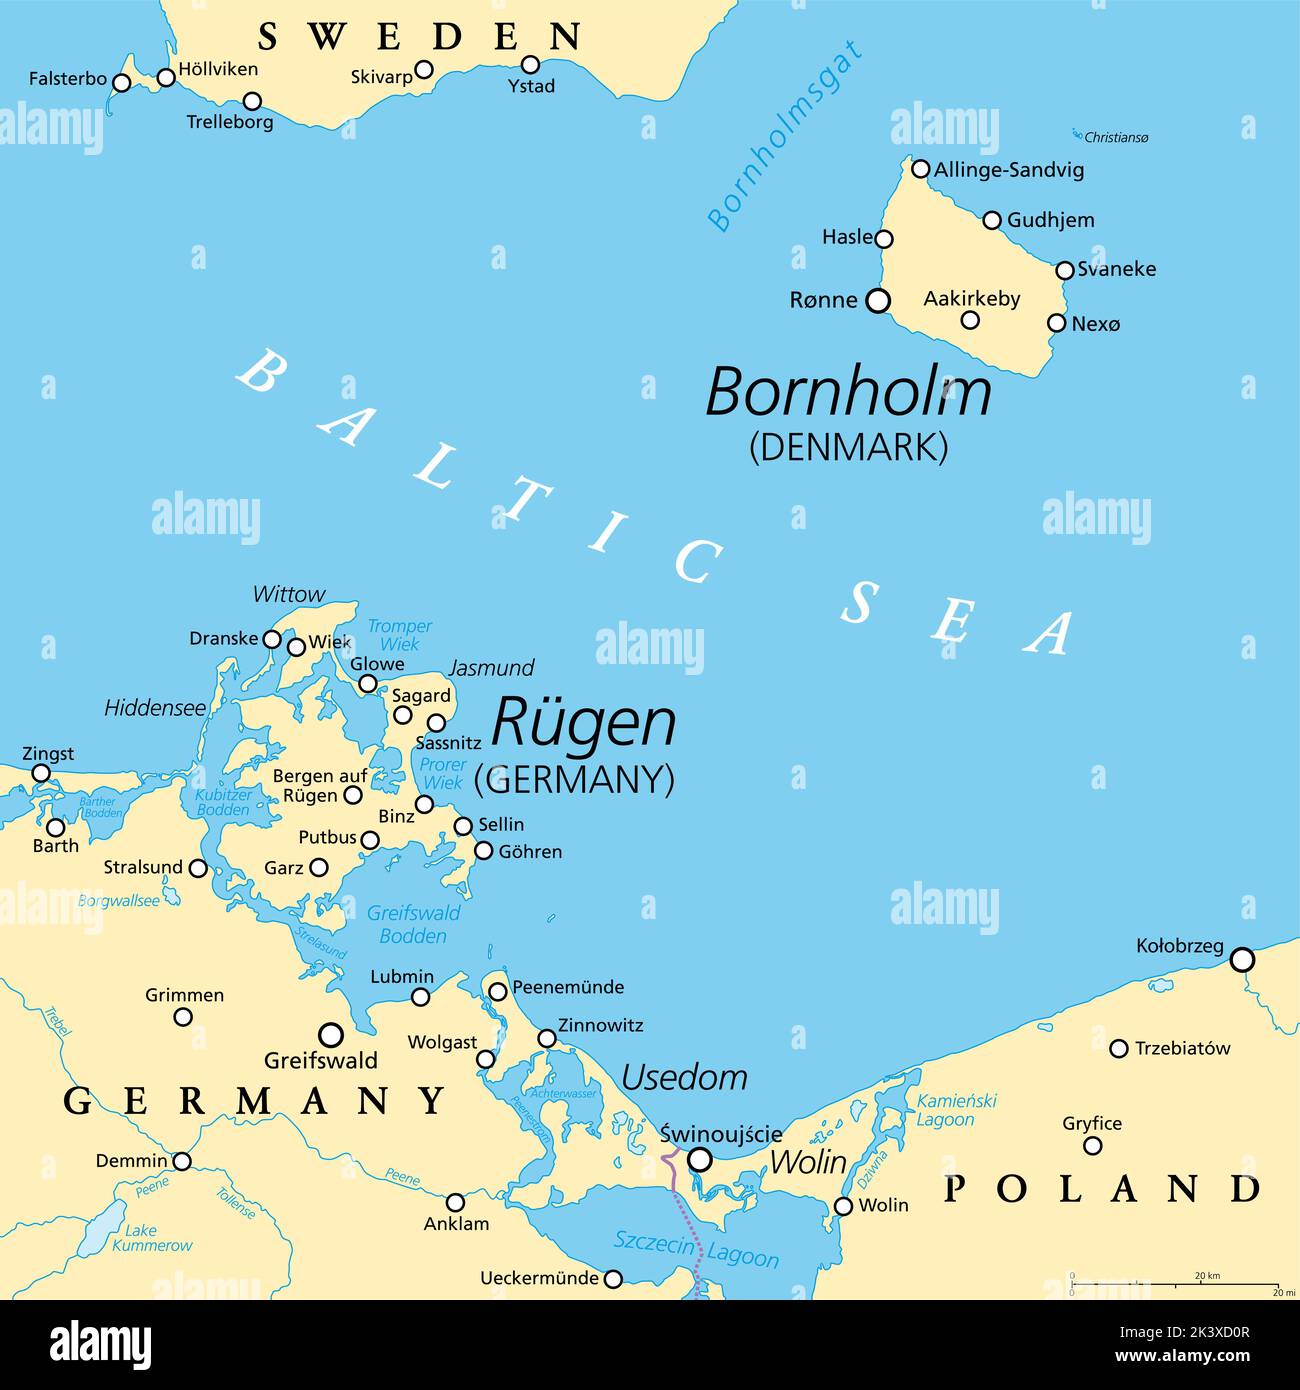 Political map of Bornholm, an Danish island, and Ruegen, the largest island of Germany. Both islands are located in the southern Baltic Sea. Stock Photo